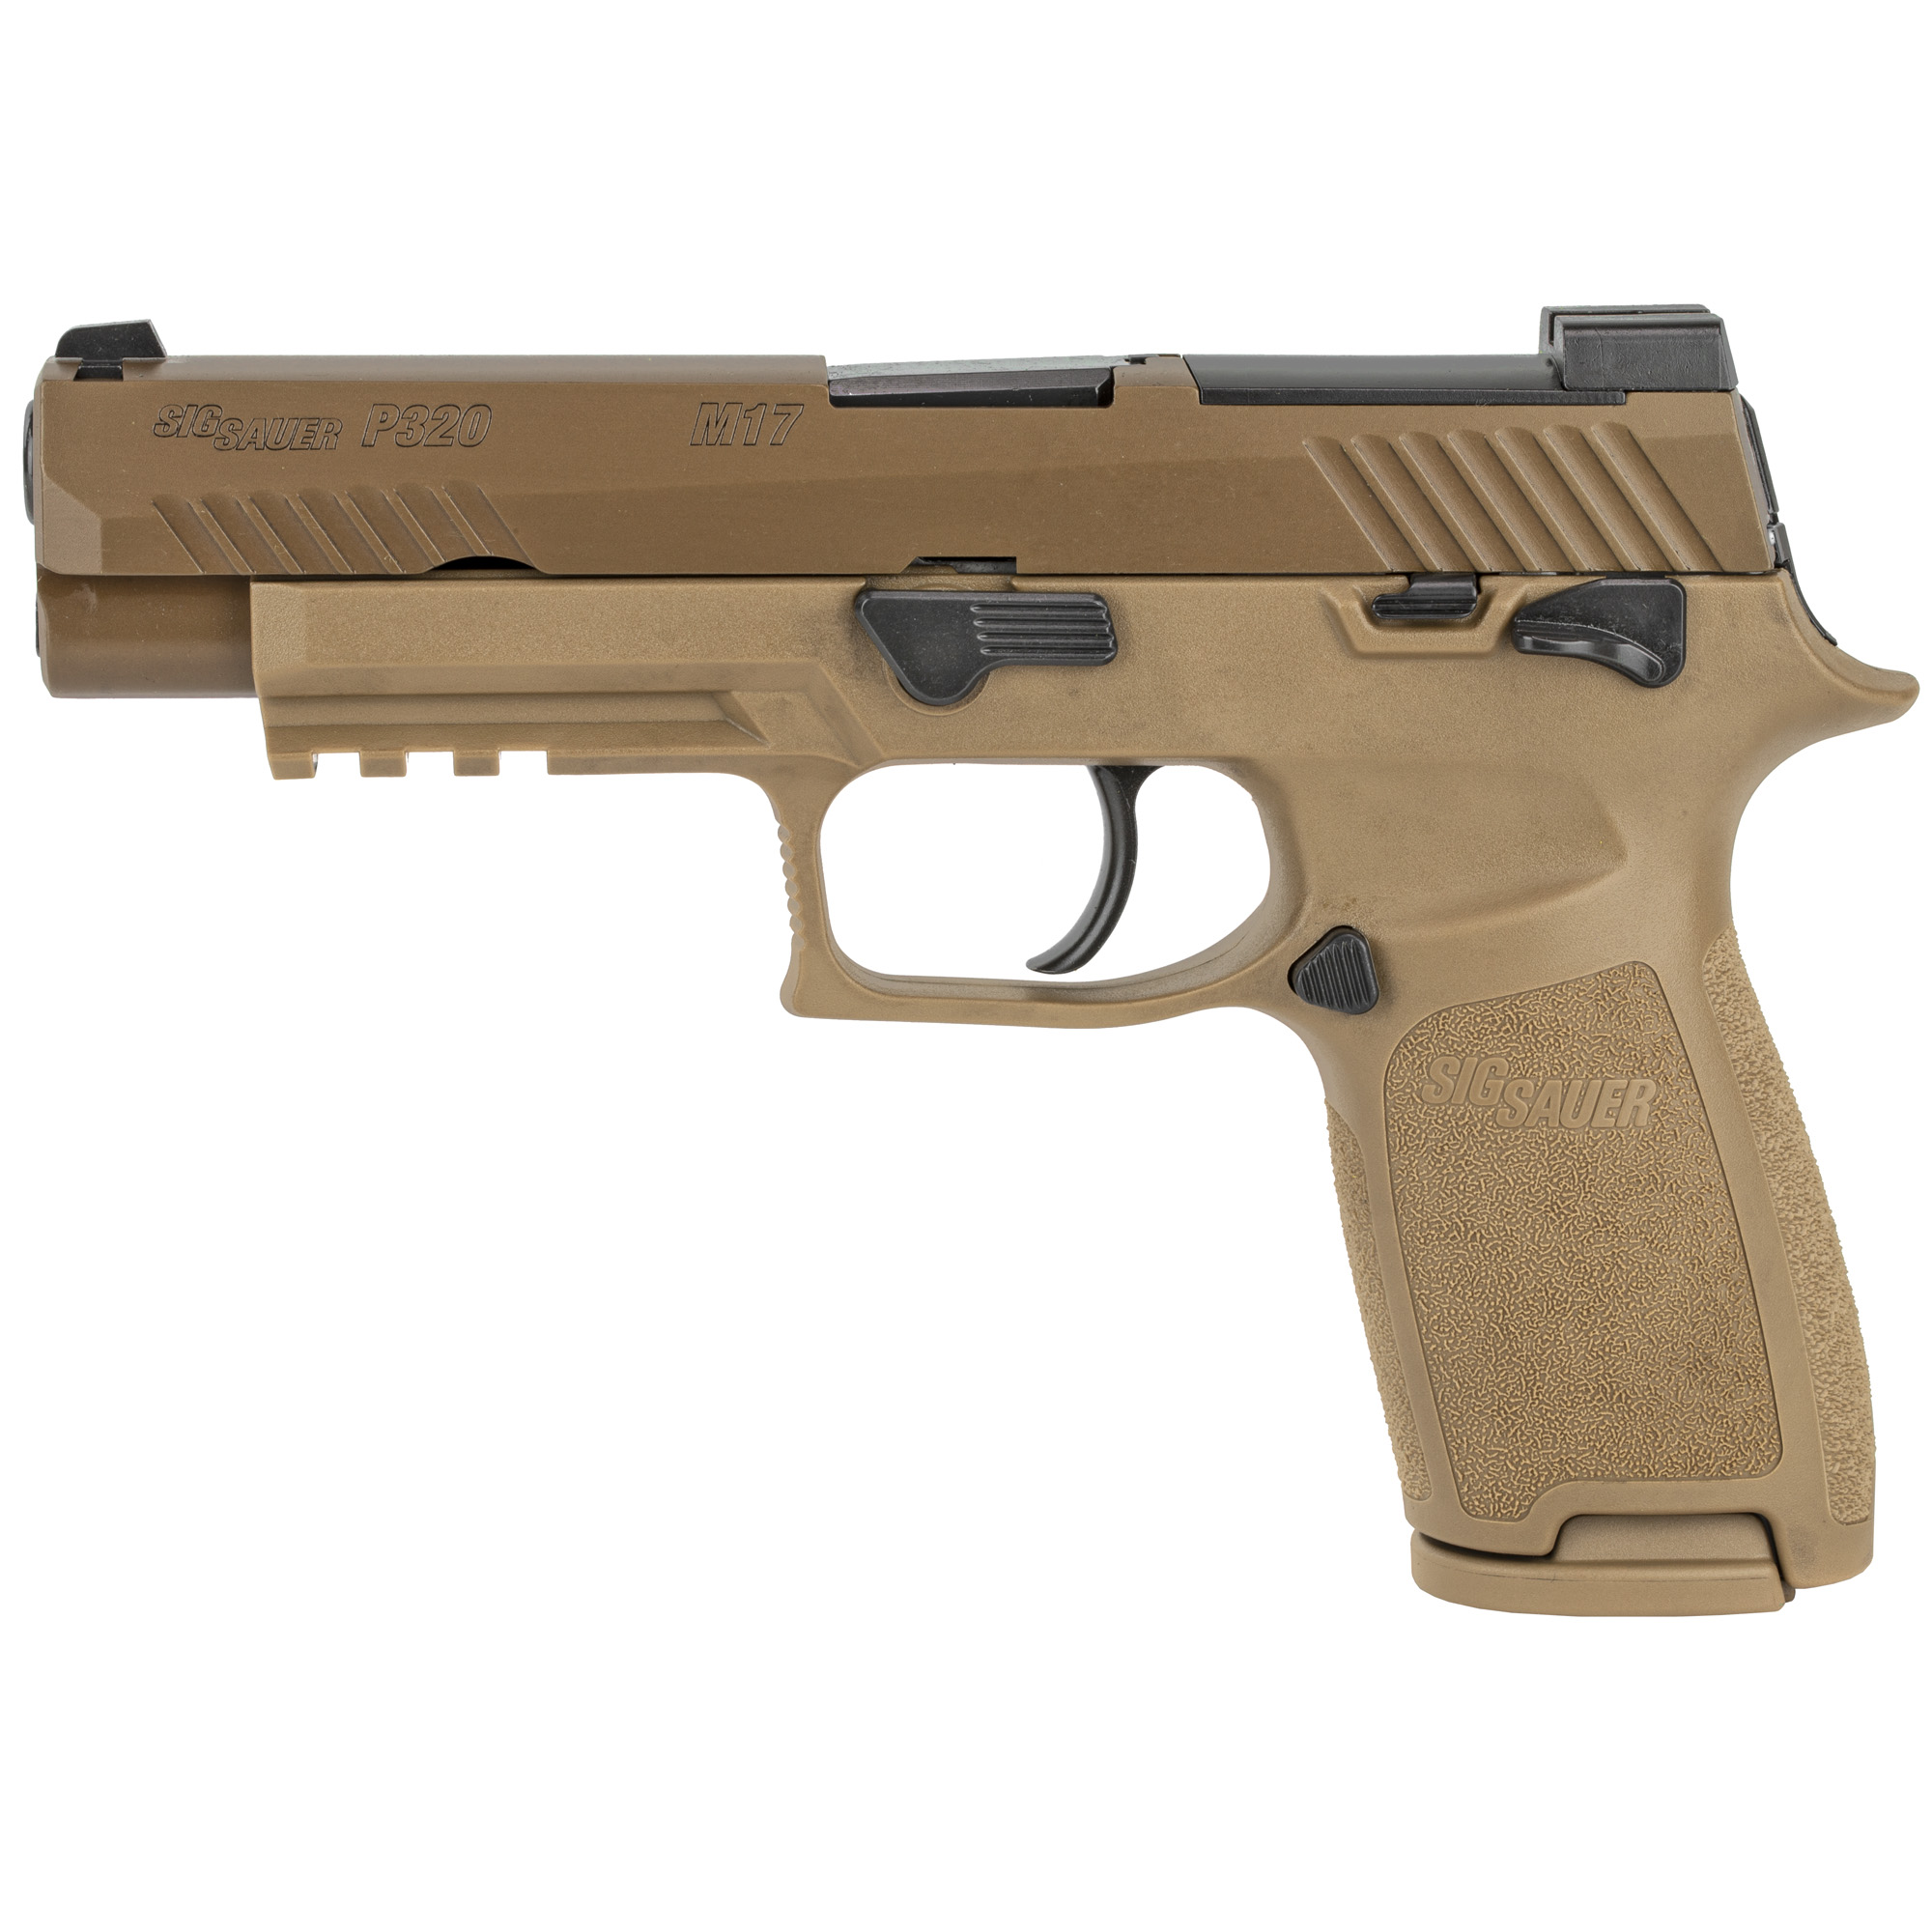 SIG Sauer P320-M17 Full Size, Semi Auto Pistol 9mm, 4.7" Barrel, 17/21 Rounds, SIGLITE Sights, Manual Safety, Coyote Tan, MPN #